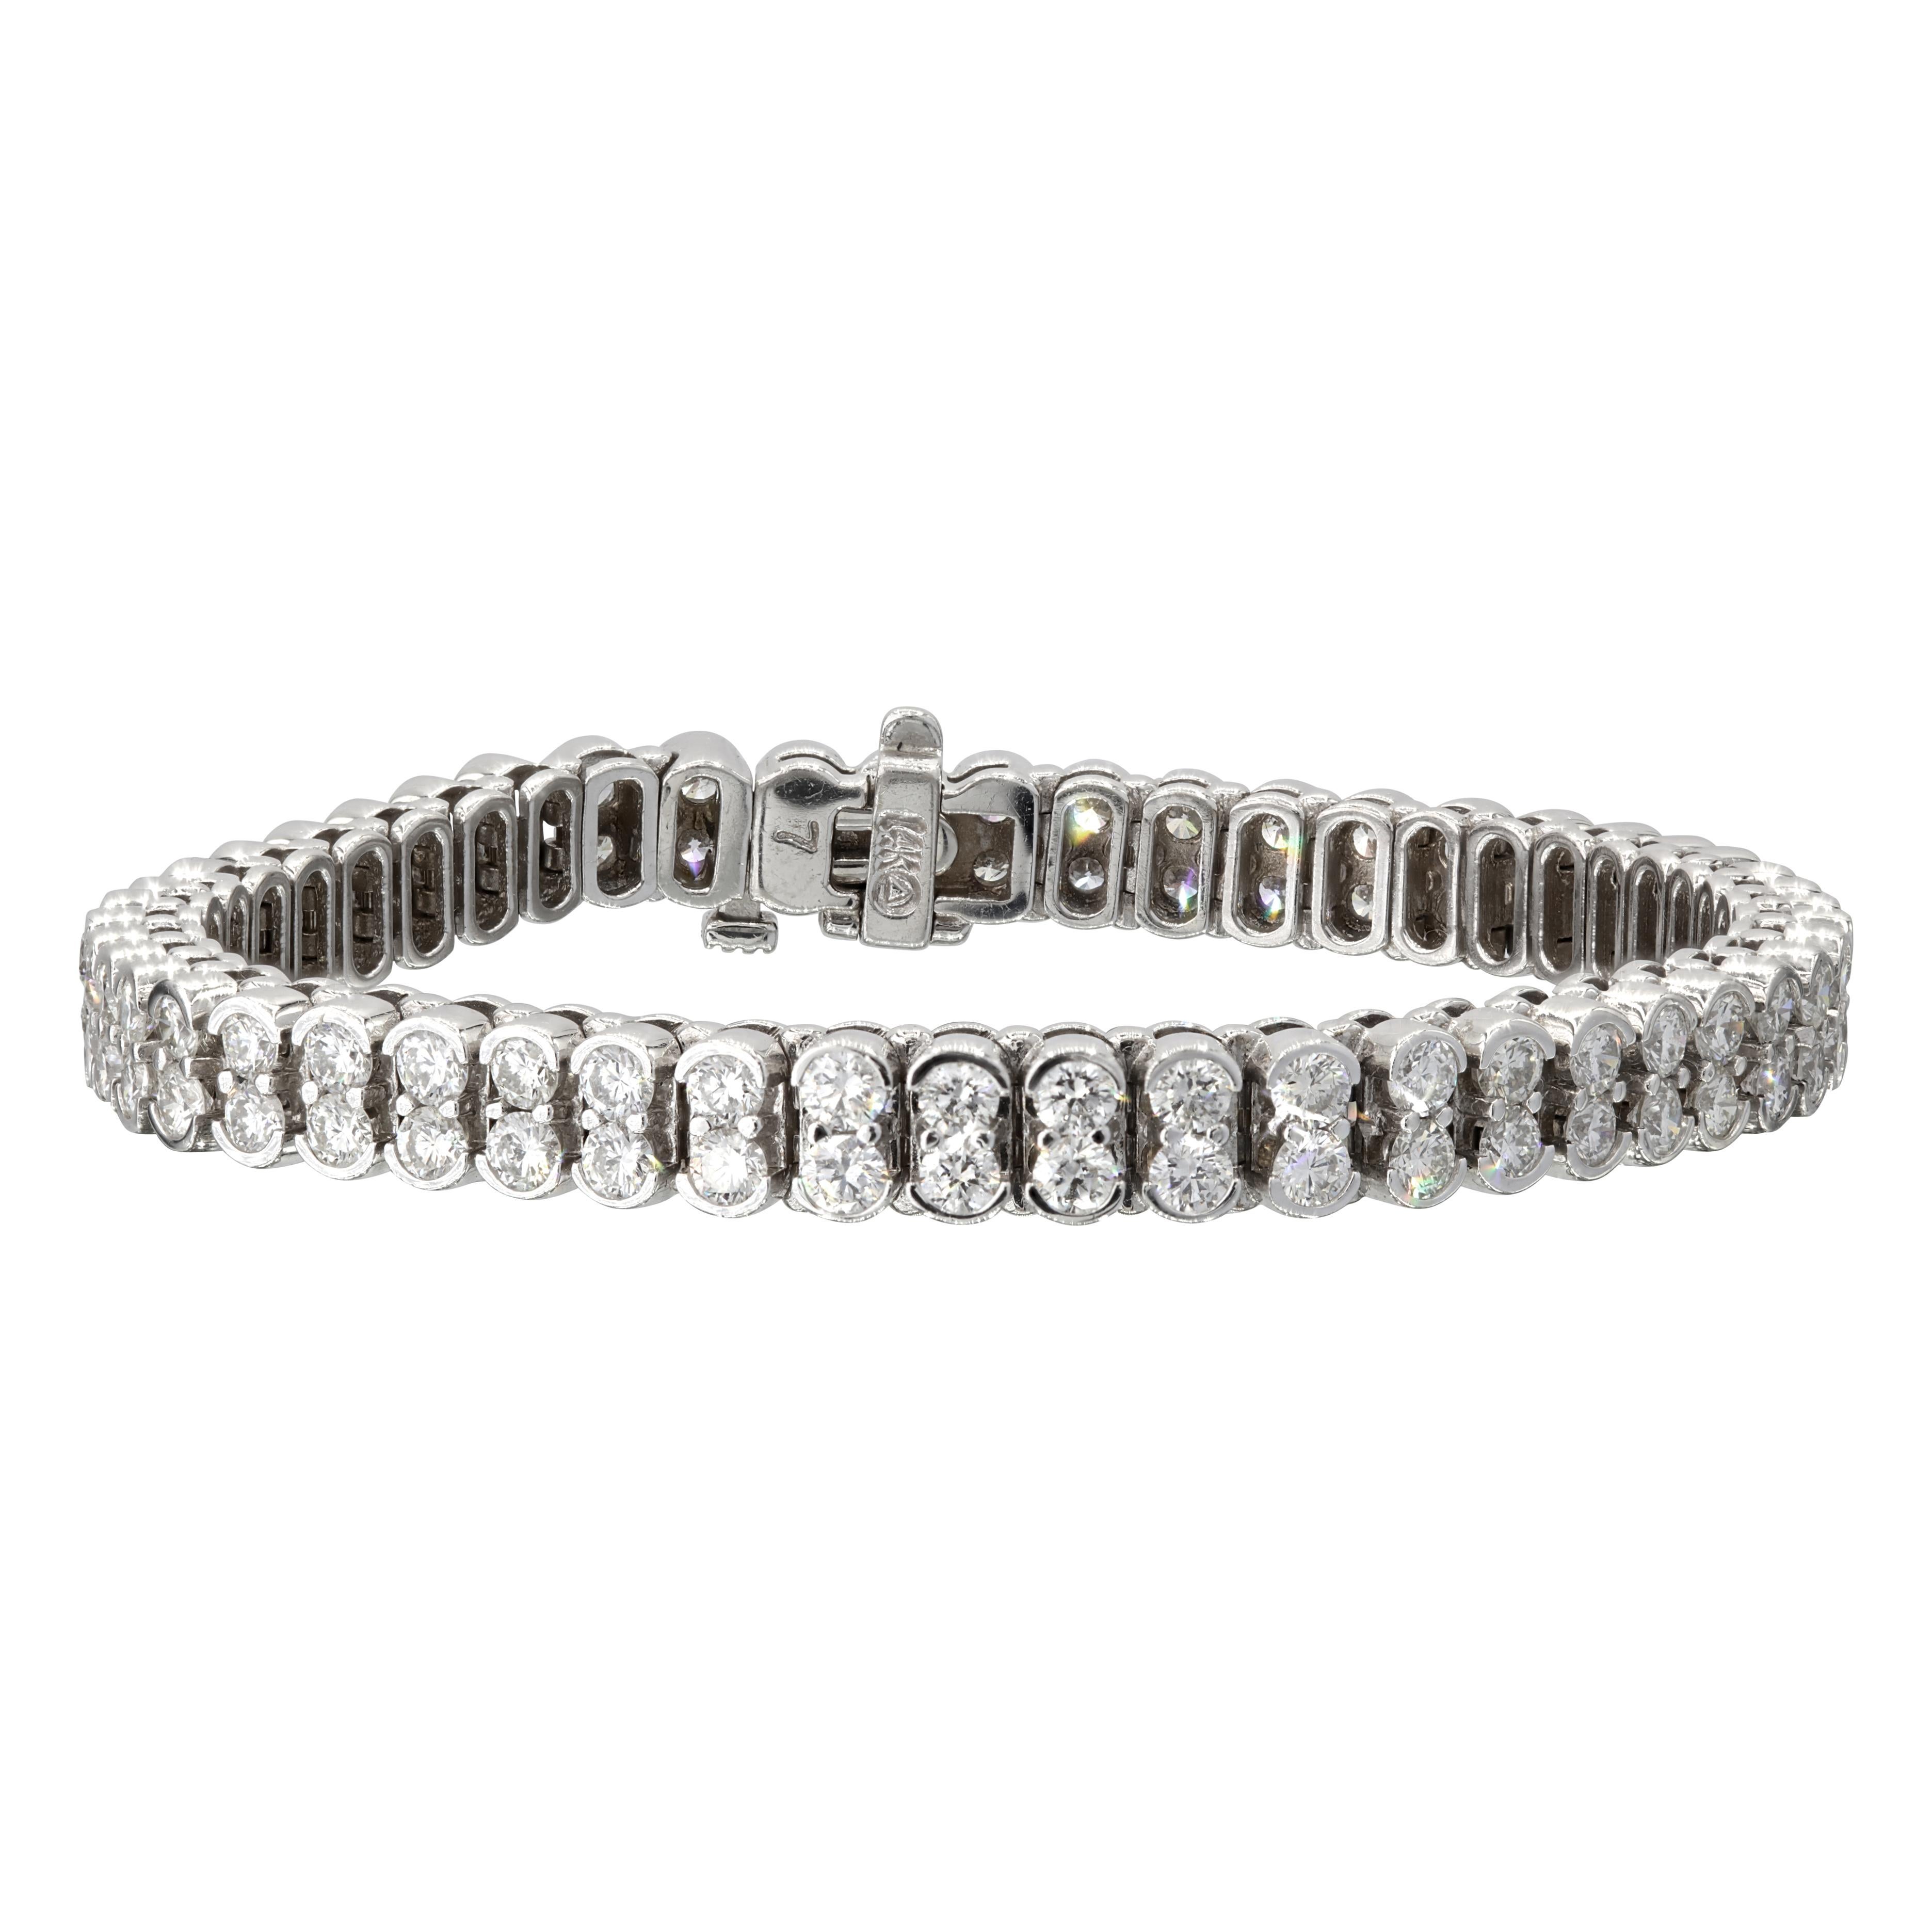 Adorn your wrist with a timeless and captivating piece of jewelry that radiates sophistication and elegance. This exquisite tennis bracelet is a true symbol of luxury, showcasing adjacent pairs of round diamonds with a combined weight of 4